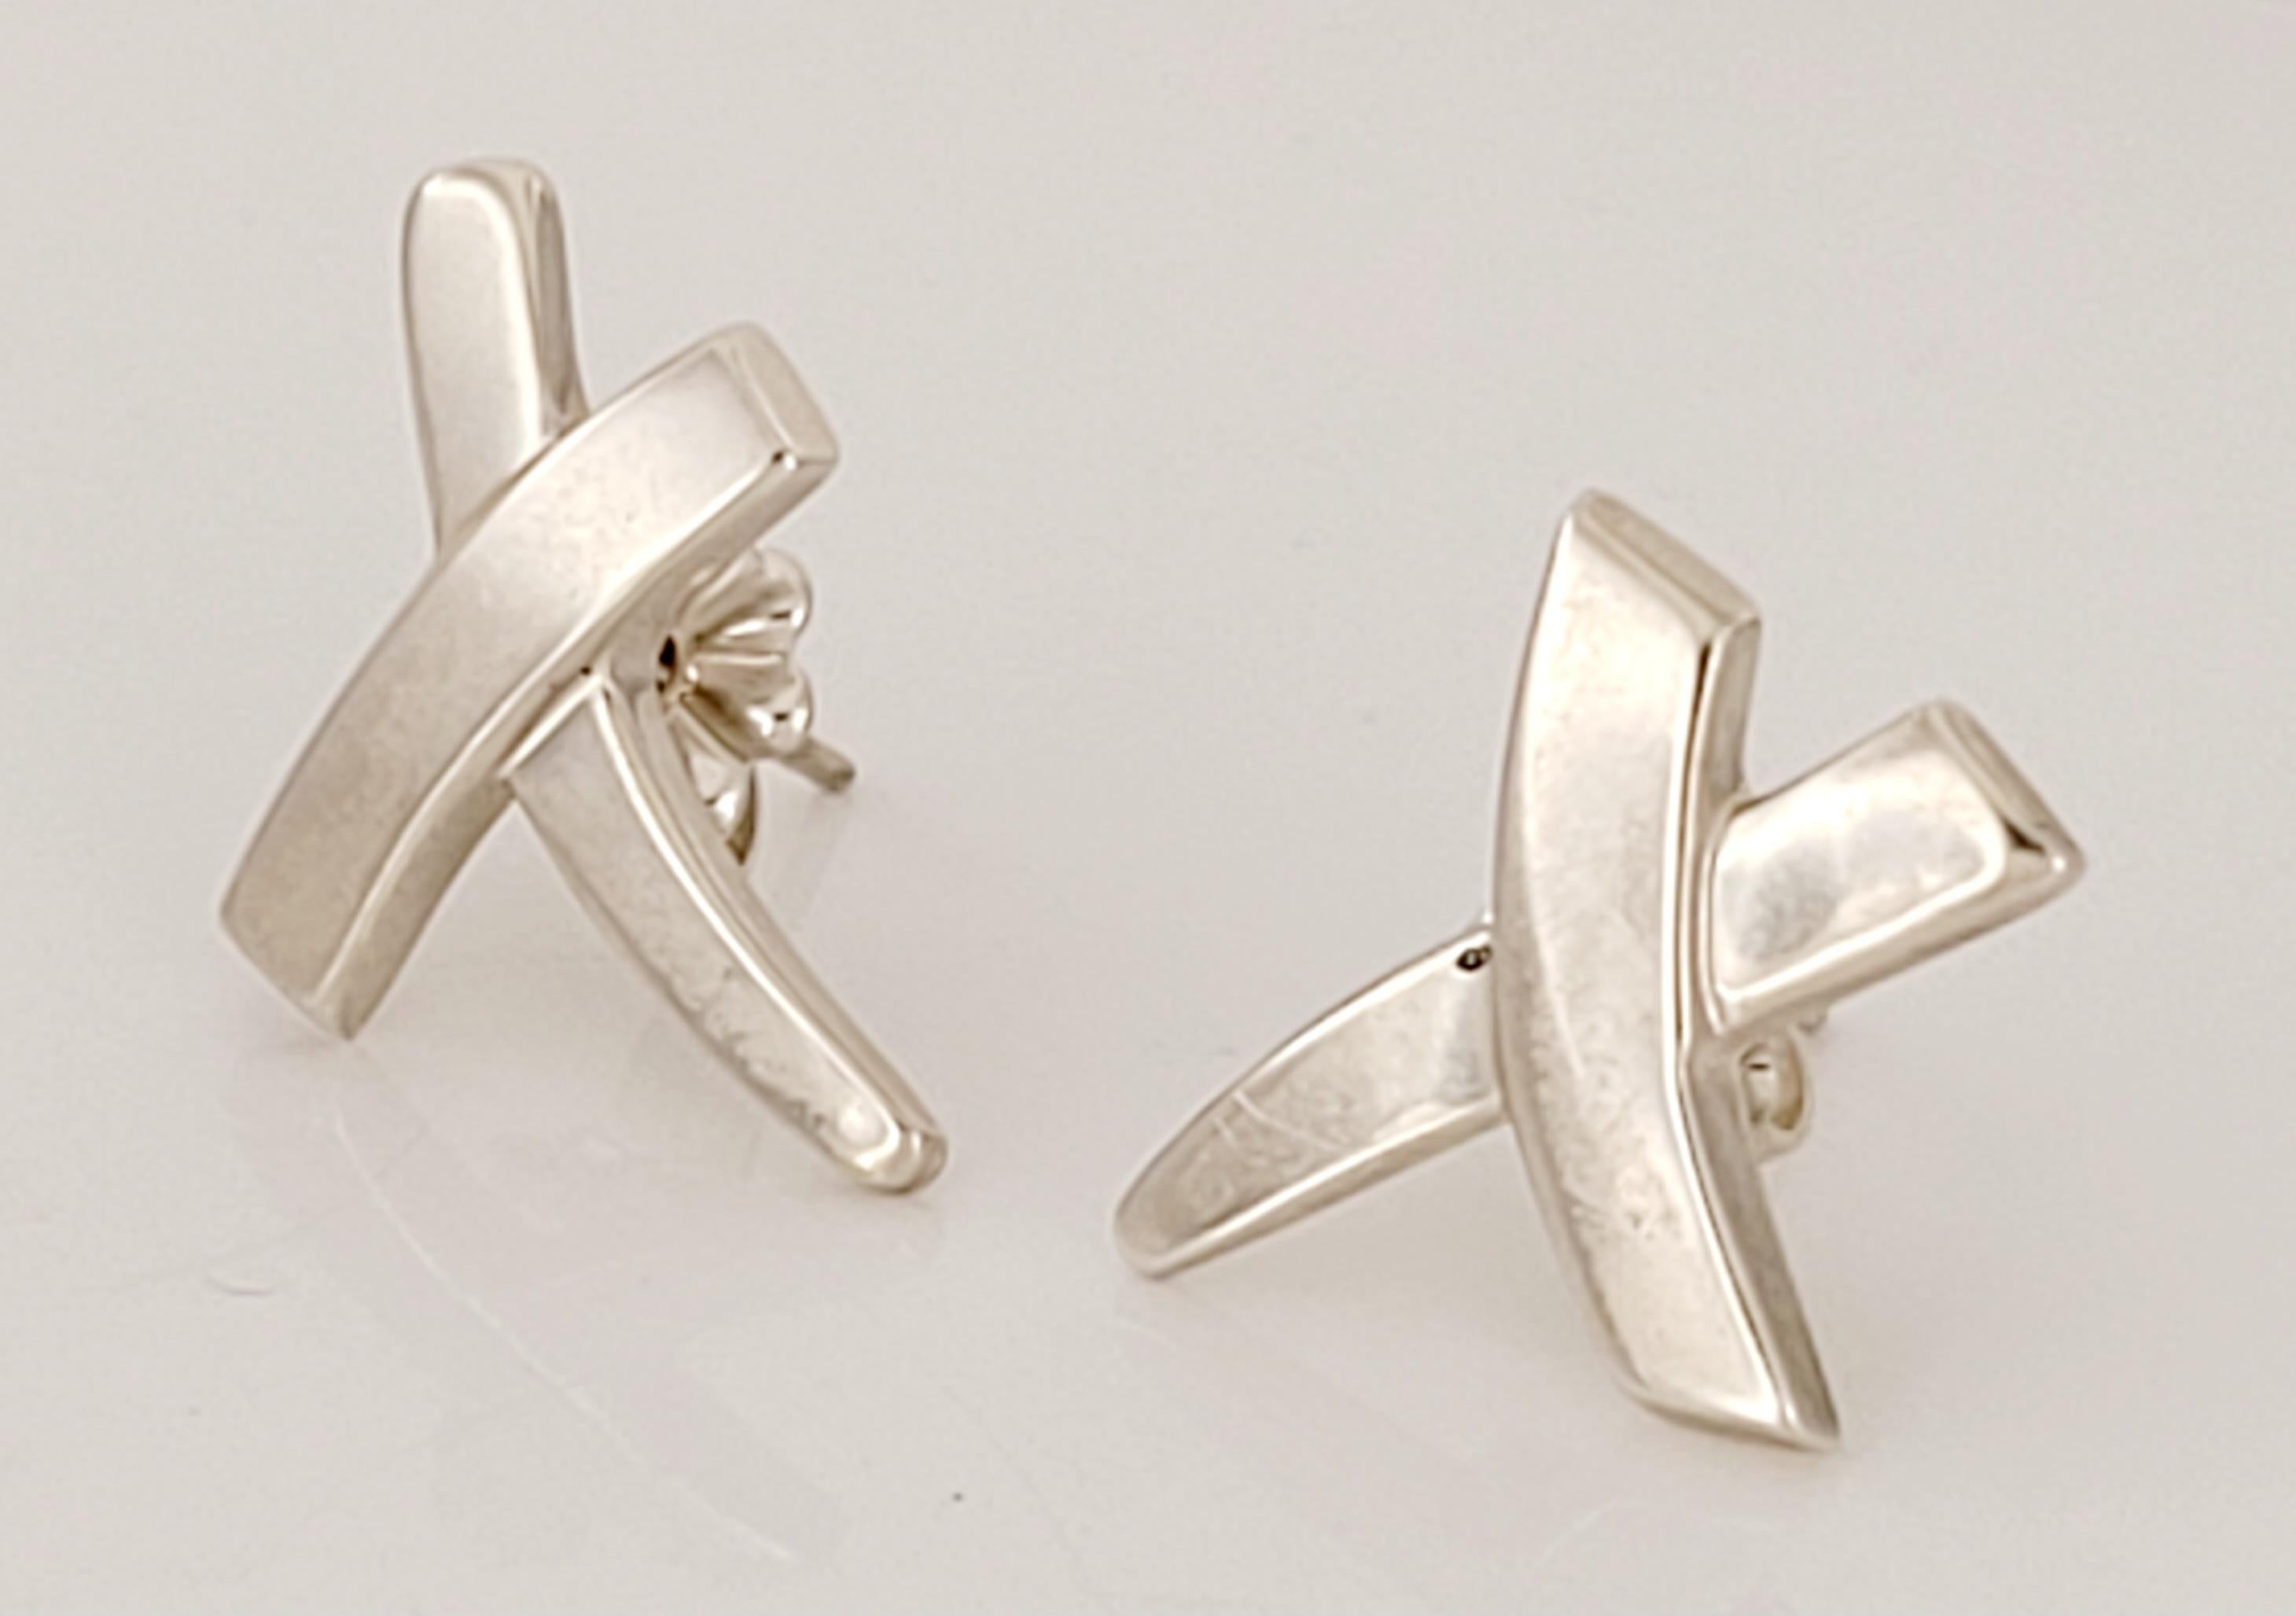 Tiffany& Co kiss cross earring
Material Sterling Silver 
Metal purity 925
Weight 2.7 total gr
Condition New, without tags
Comes with Tiffany& Co Pouch